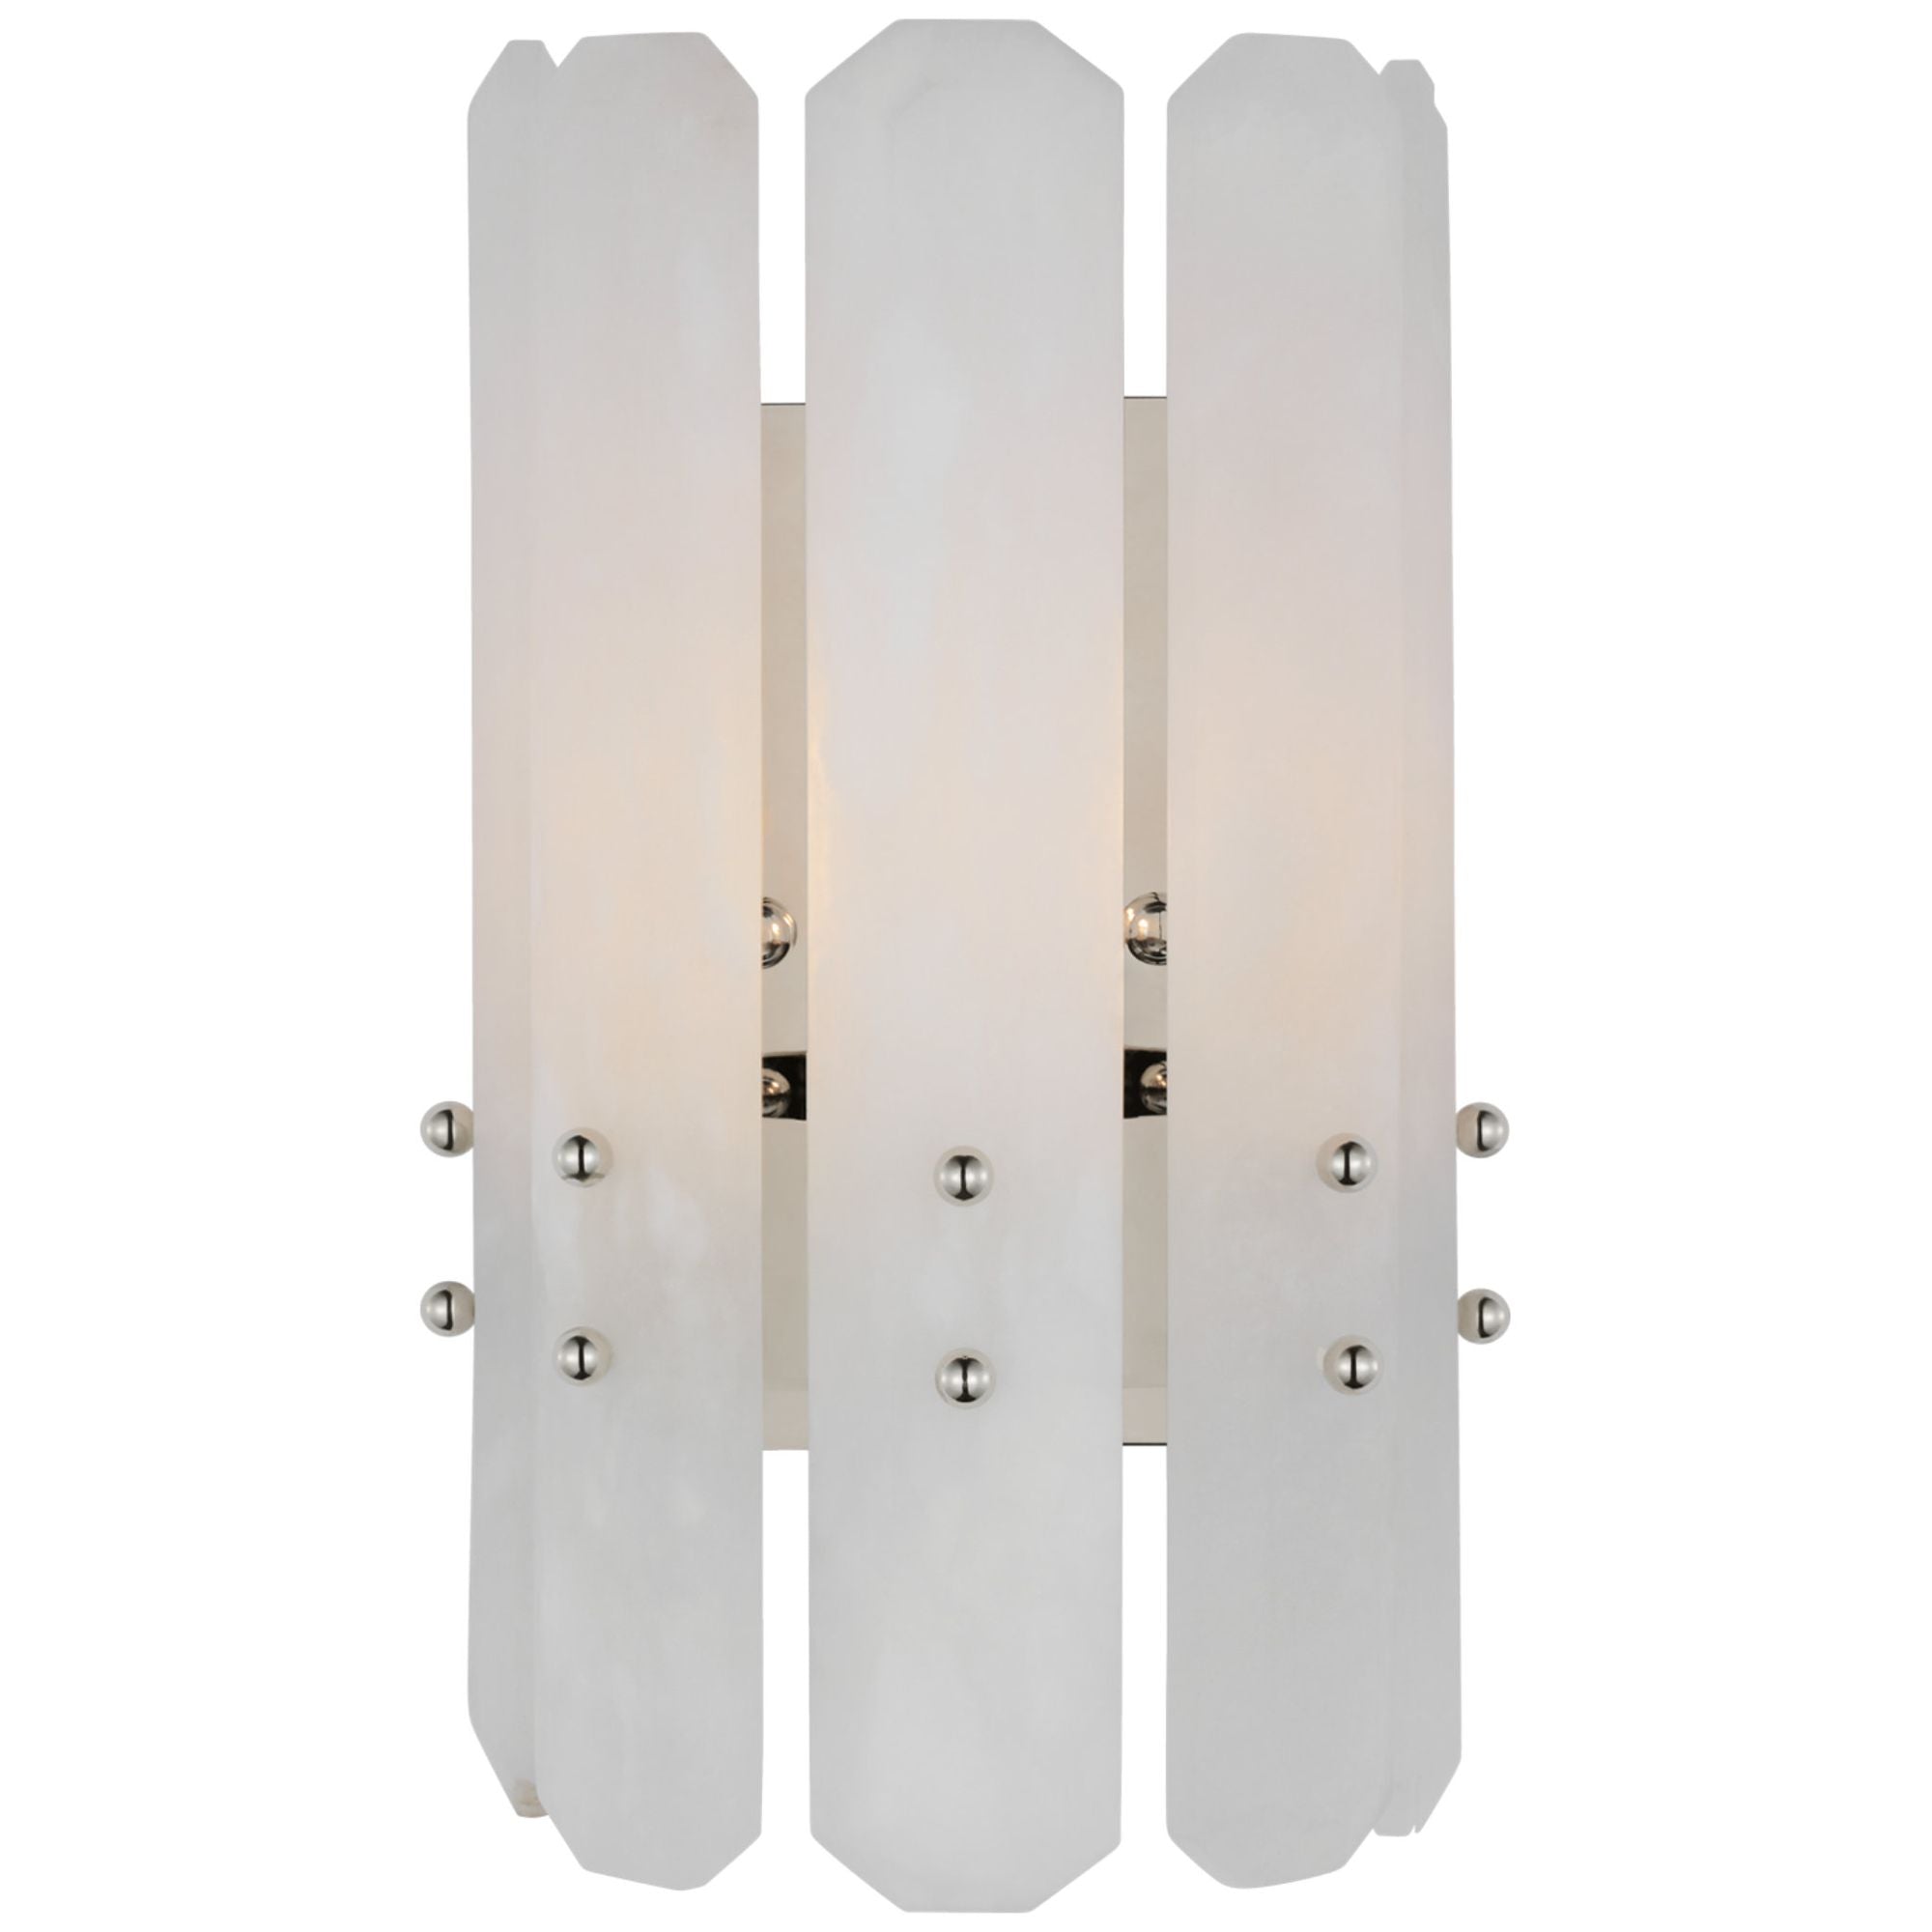 AERIN Bonnington Wall Sconce in Polished Nickel with Alabaster